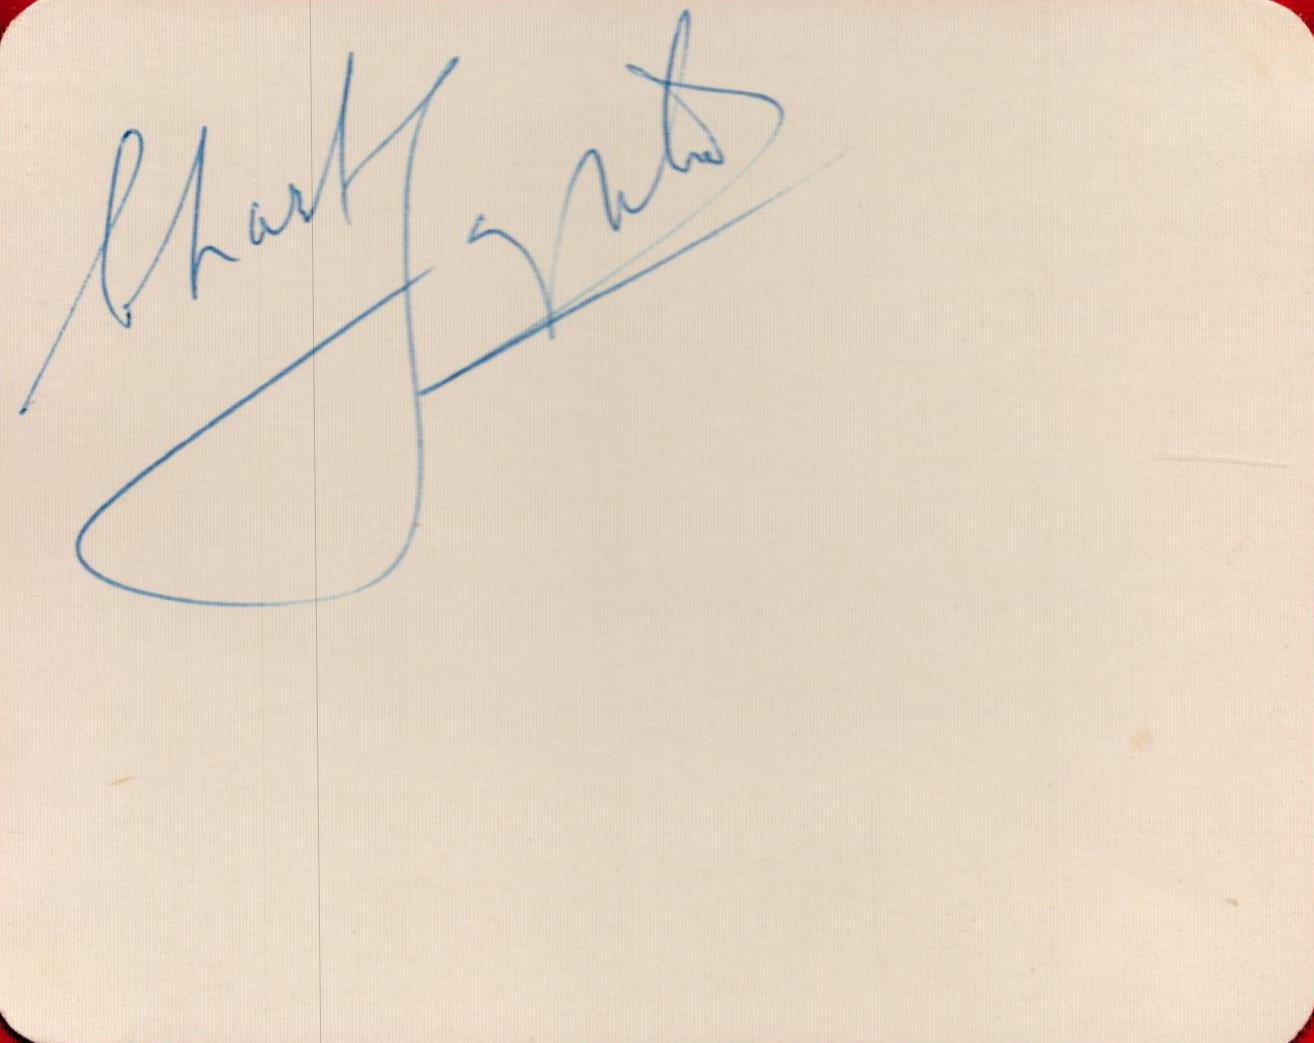 Charles Laughton Signed 4x3 inch approx Autograph Album Page. Signed in blue ink. Good Condition.